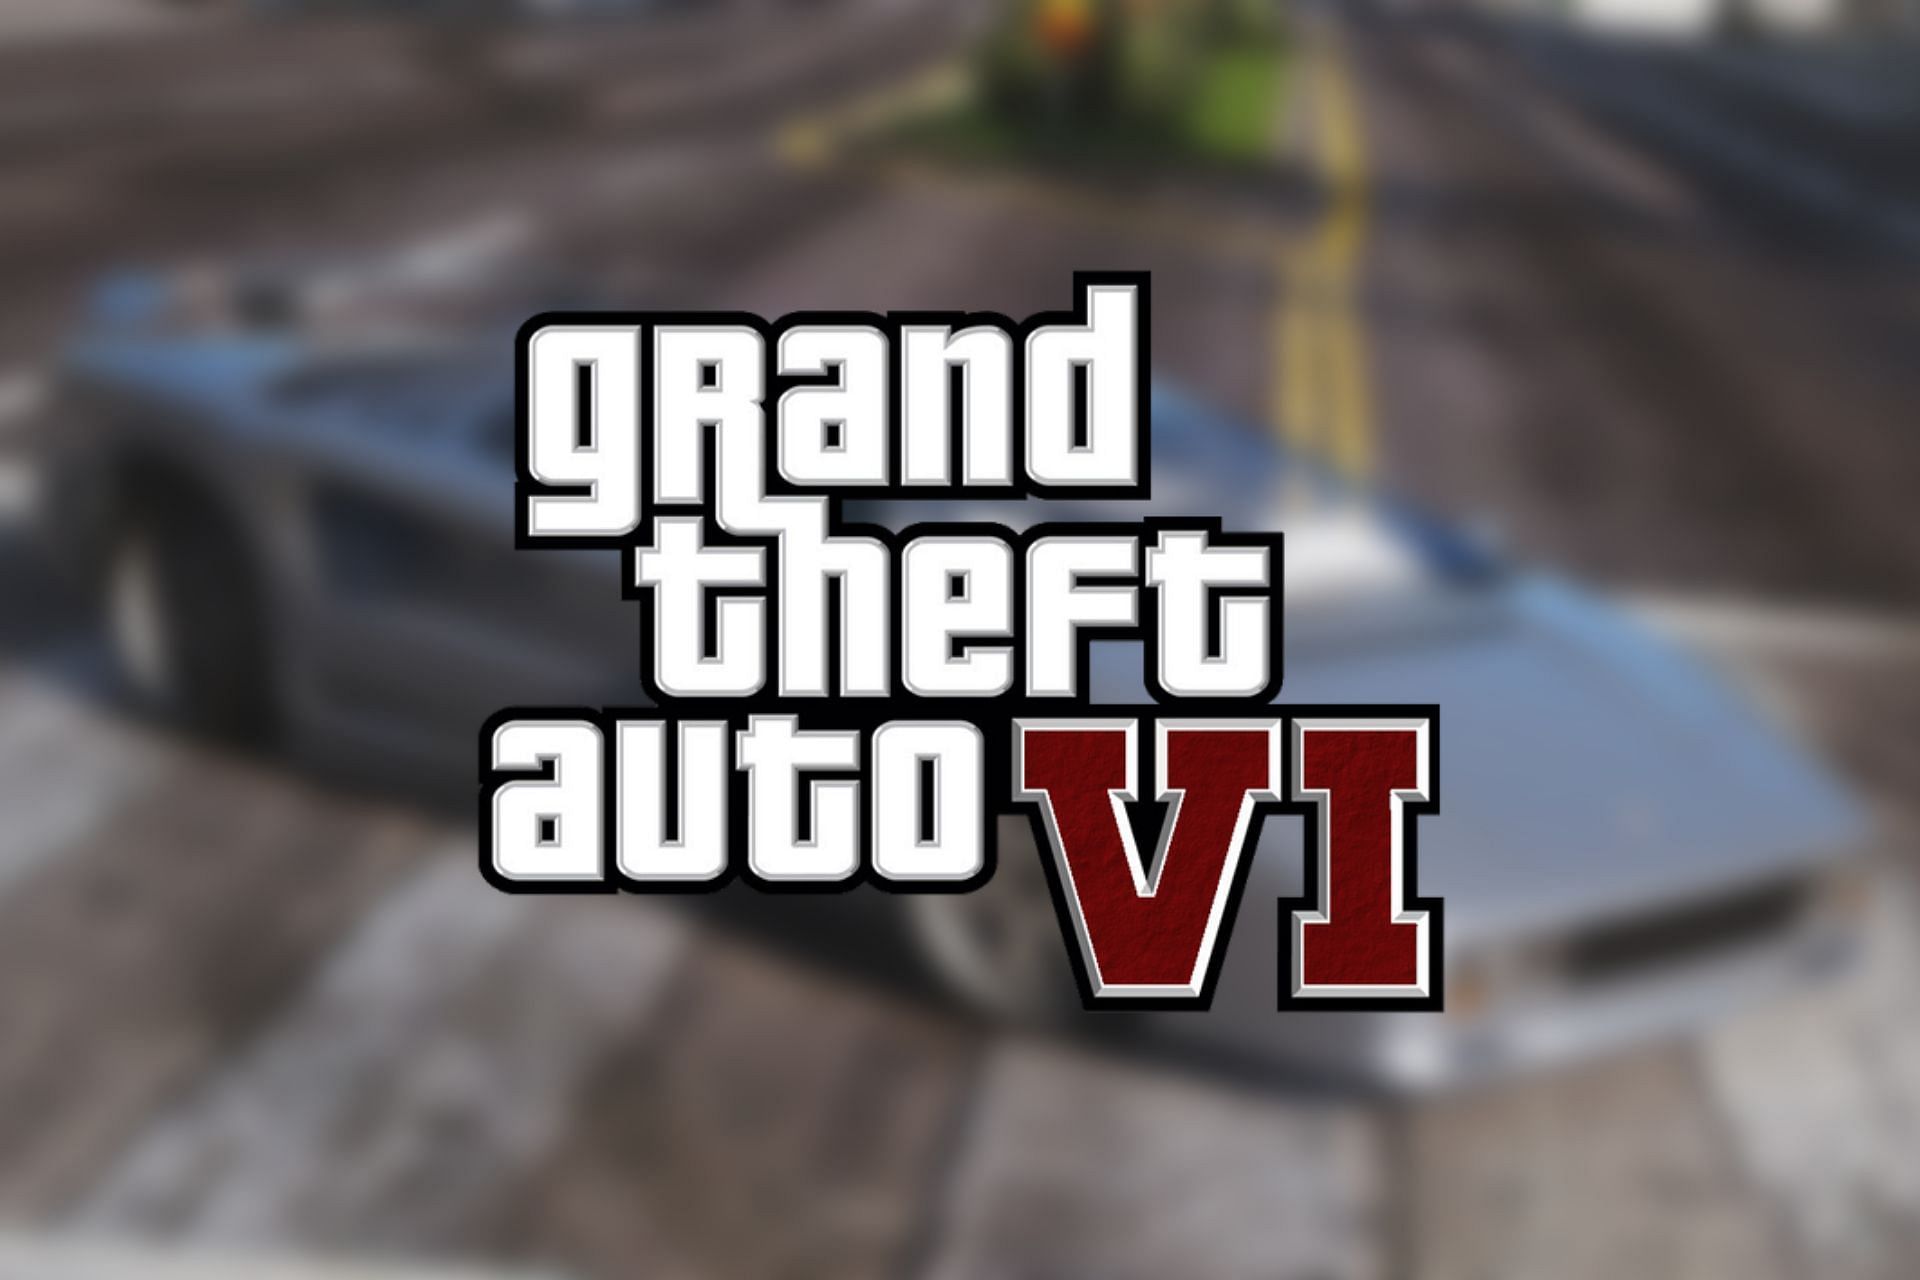 GTA 6 trailer is one of the most anticipated video game trailers (Images via Rockstar Games)